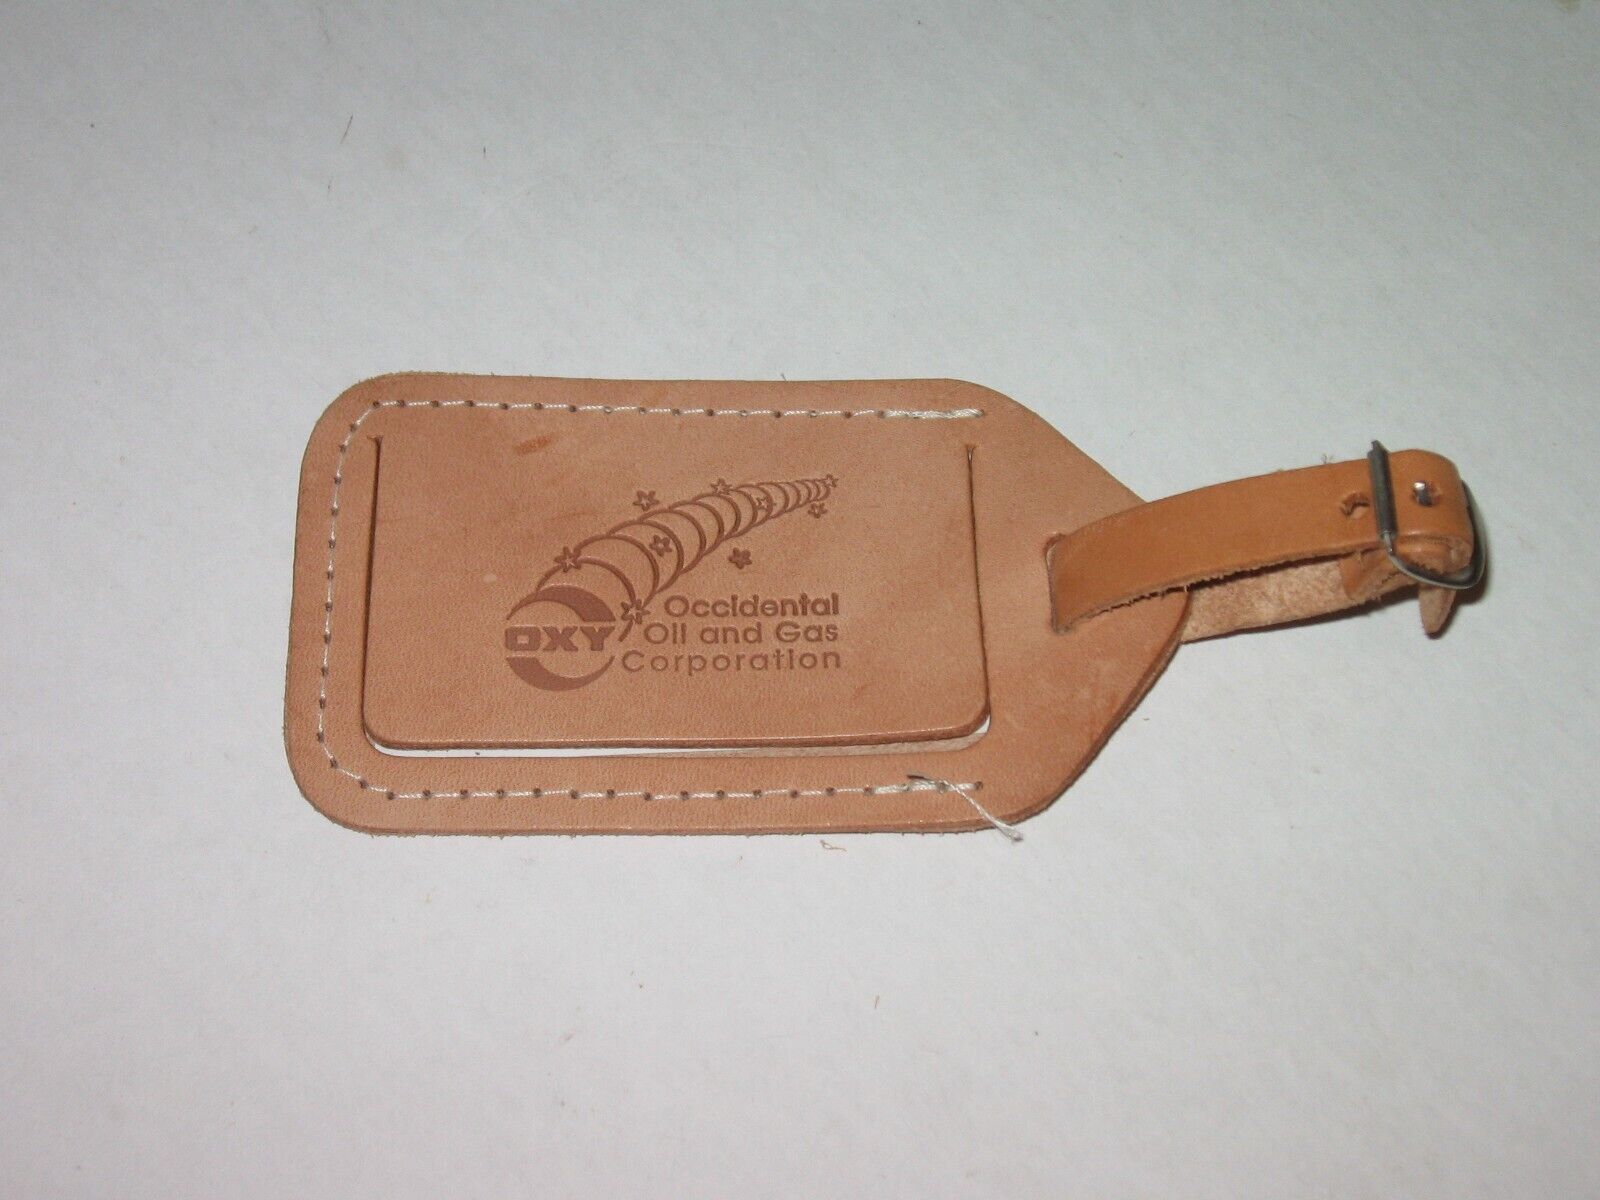 OXY Occidental Petroleum Oil and Gas Corporation LEATHER LUGGAGE TAG New UNUSED